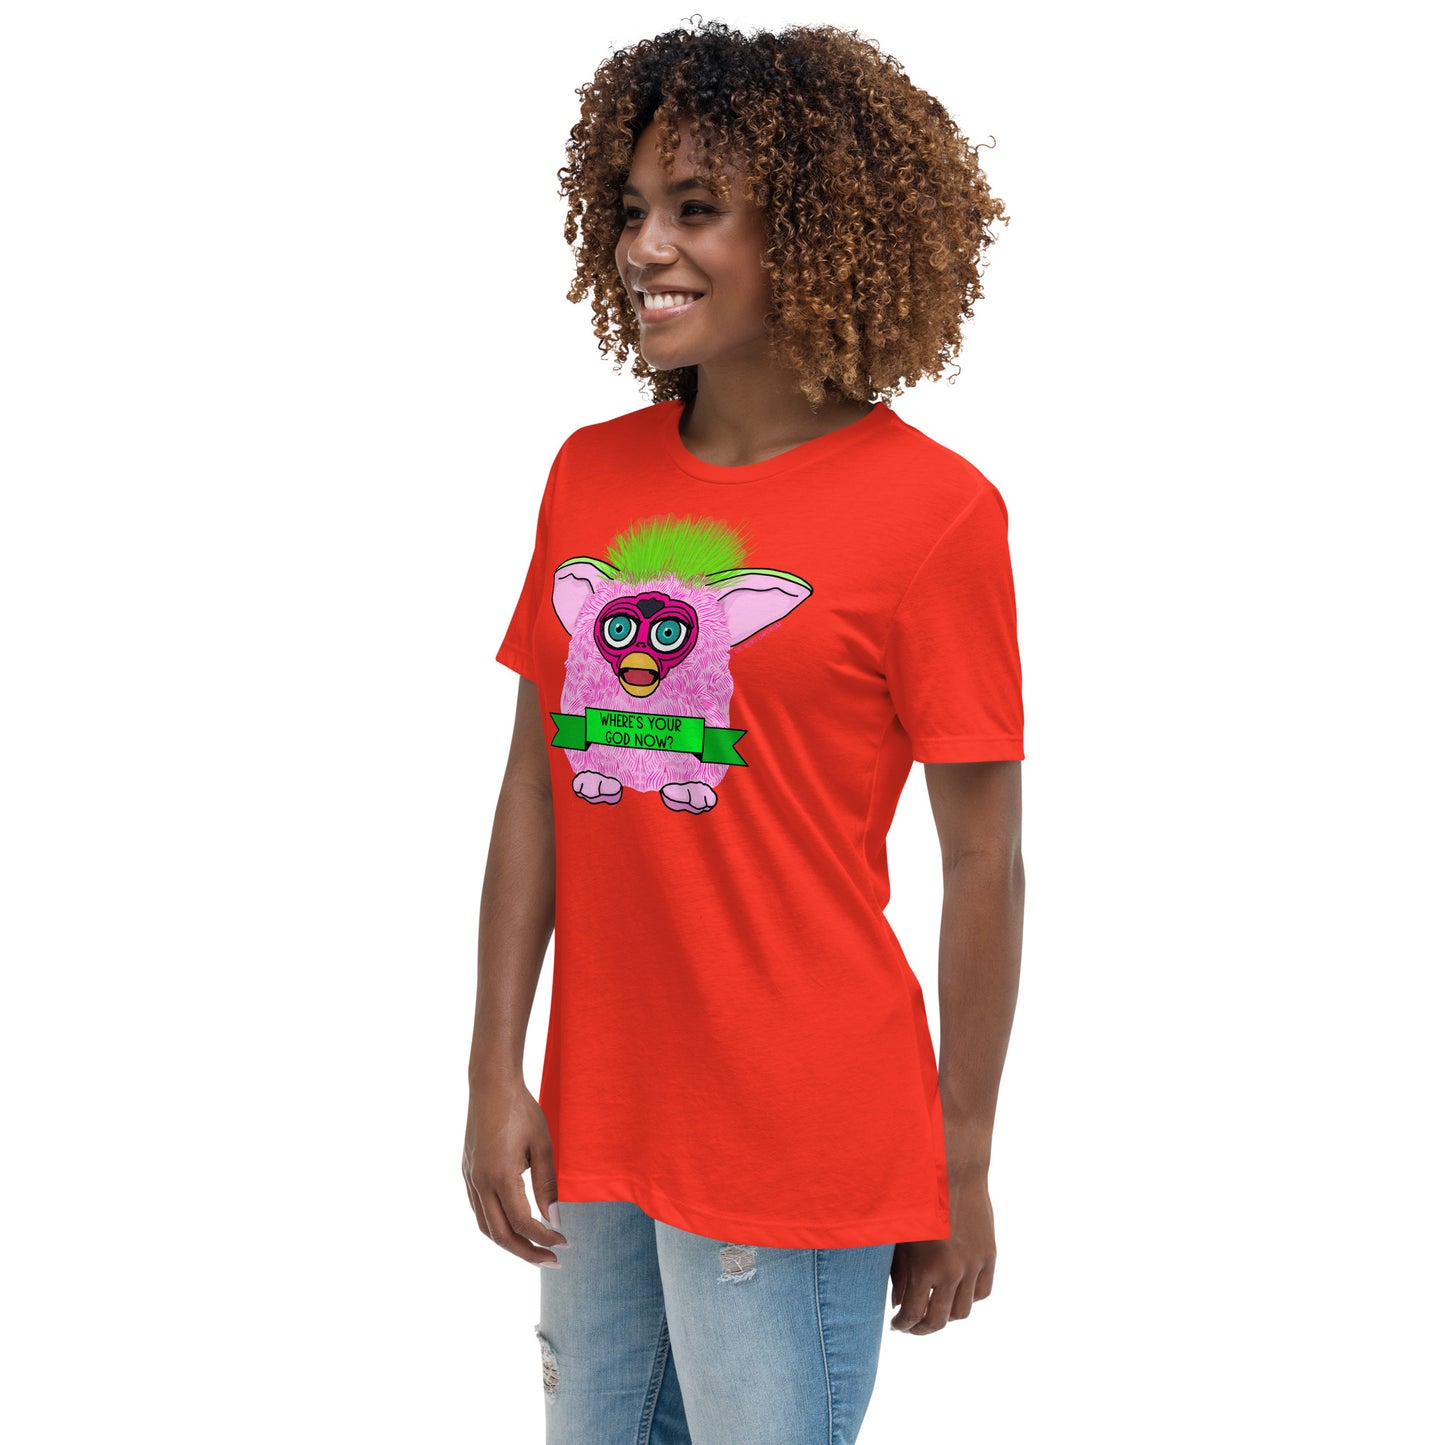 Furby - Where's Your God Now? Women's Relaxed T-Shirt